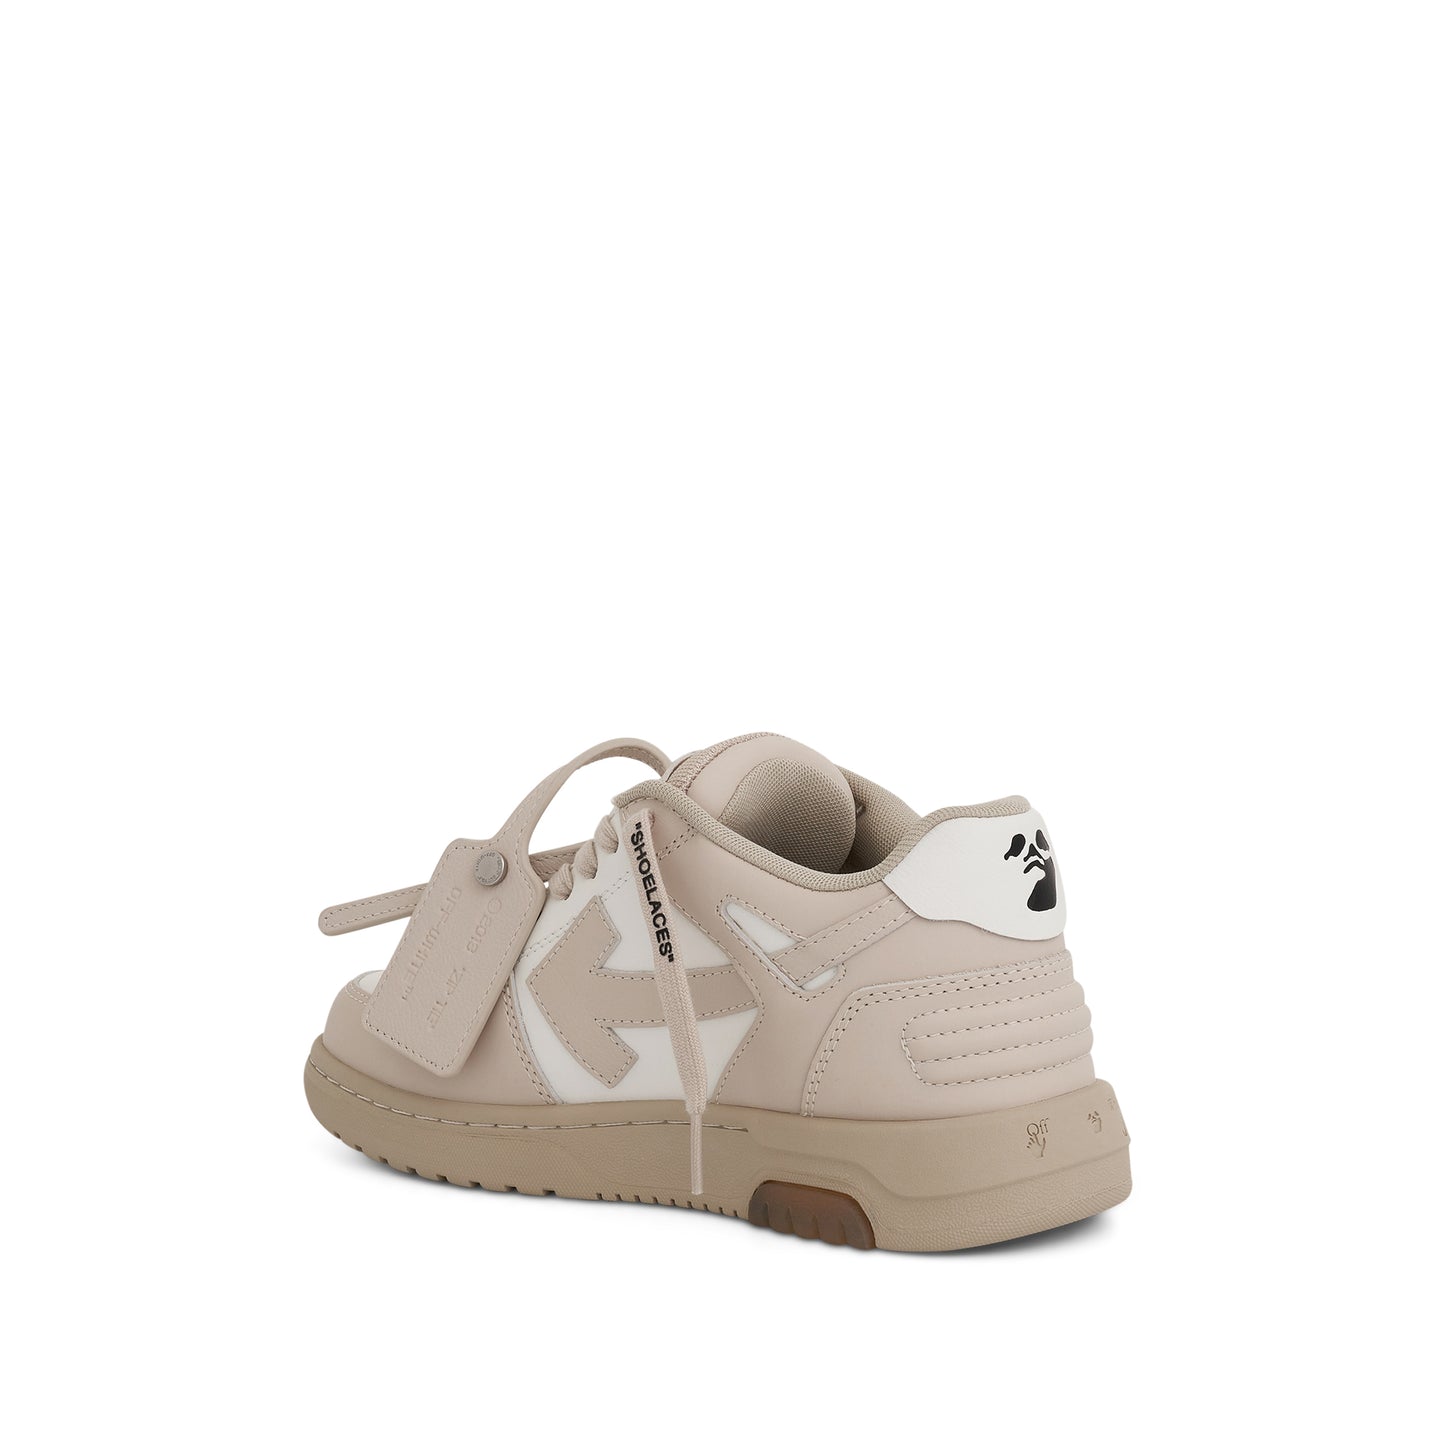 Out Of Office Sneaker in Beige/White